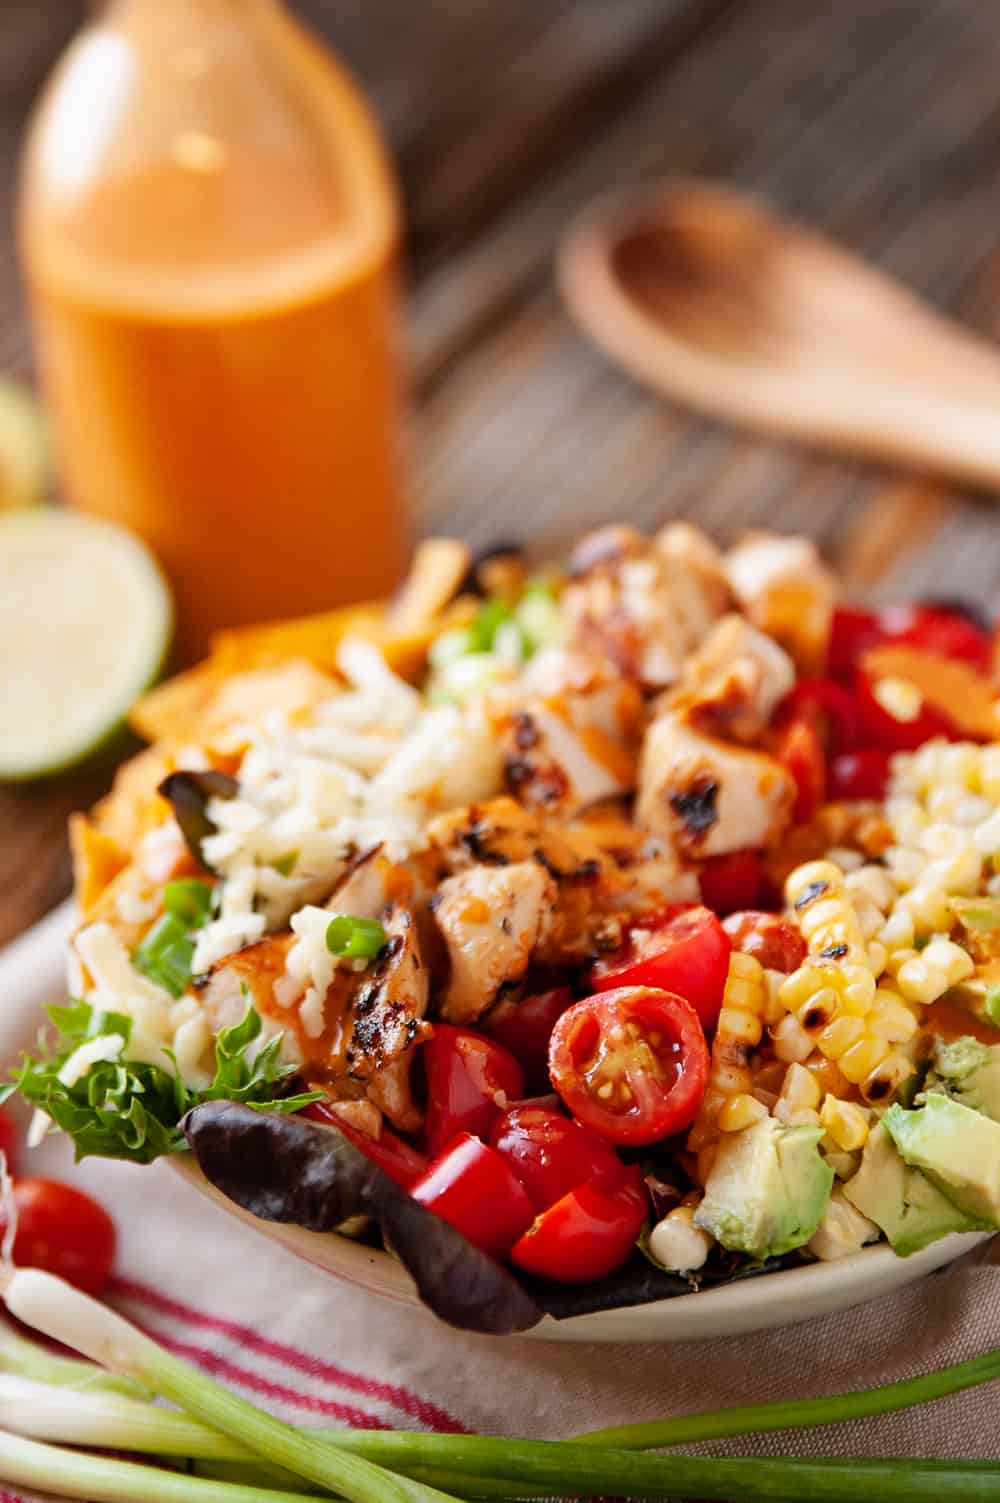 Southwest Chicken Cobb Salad with Chipotle Lime Dressing